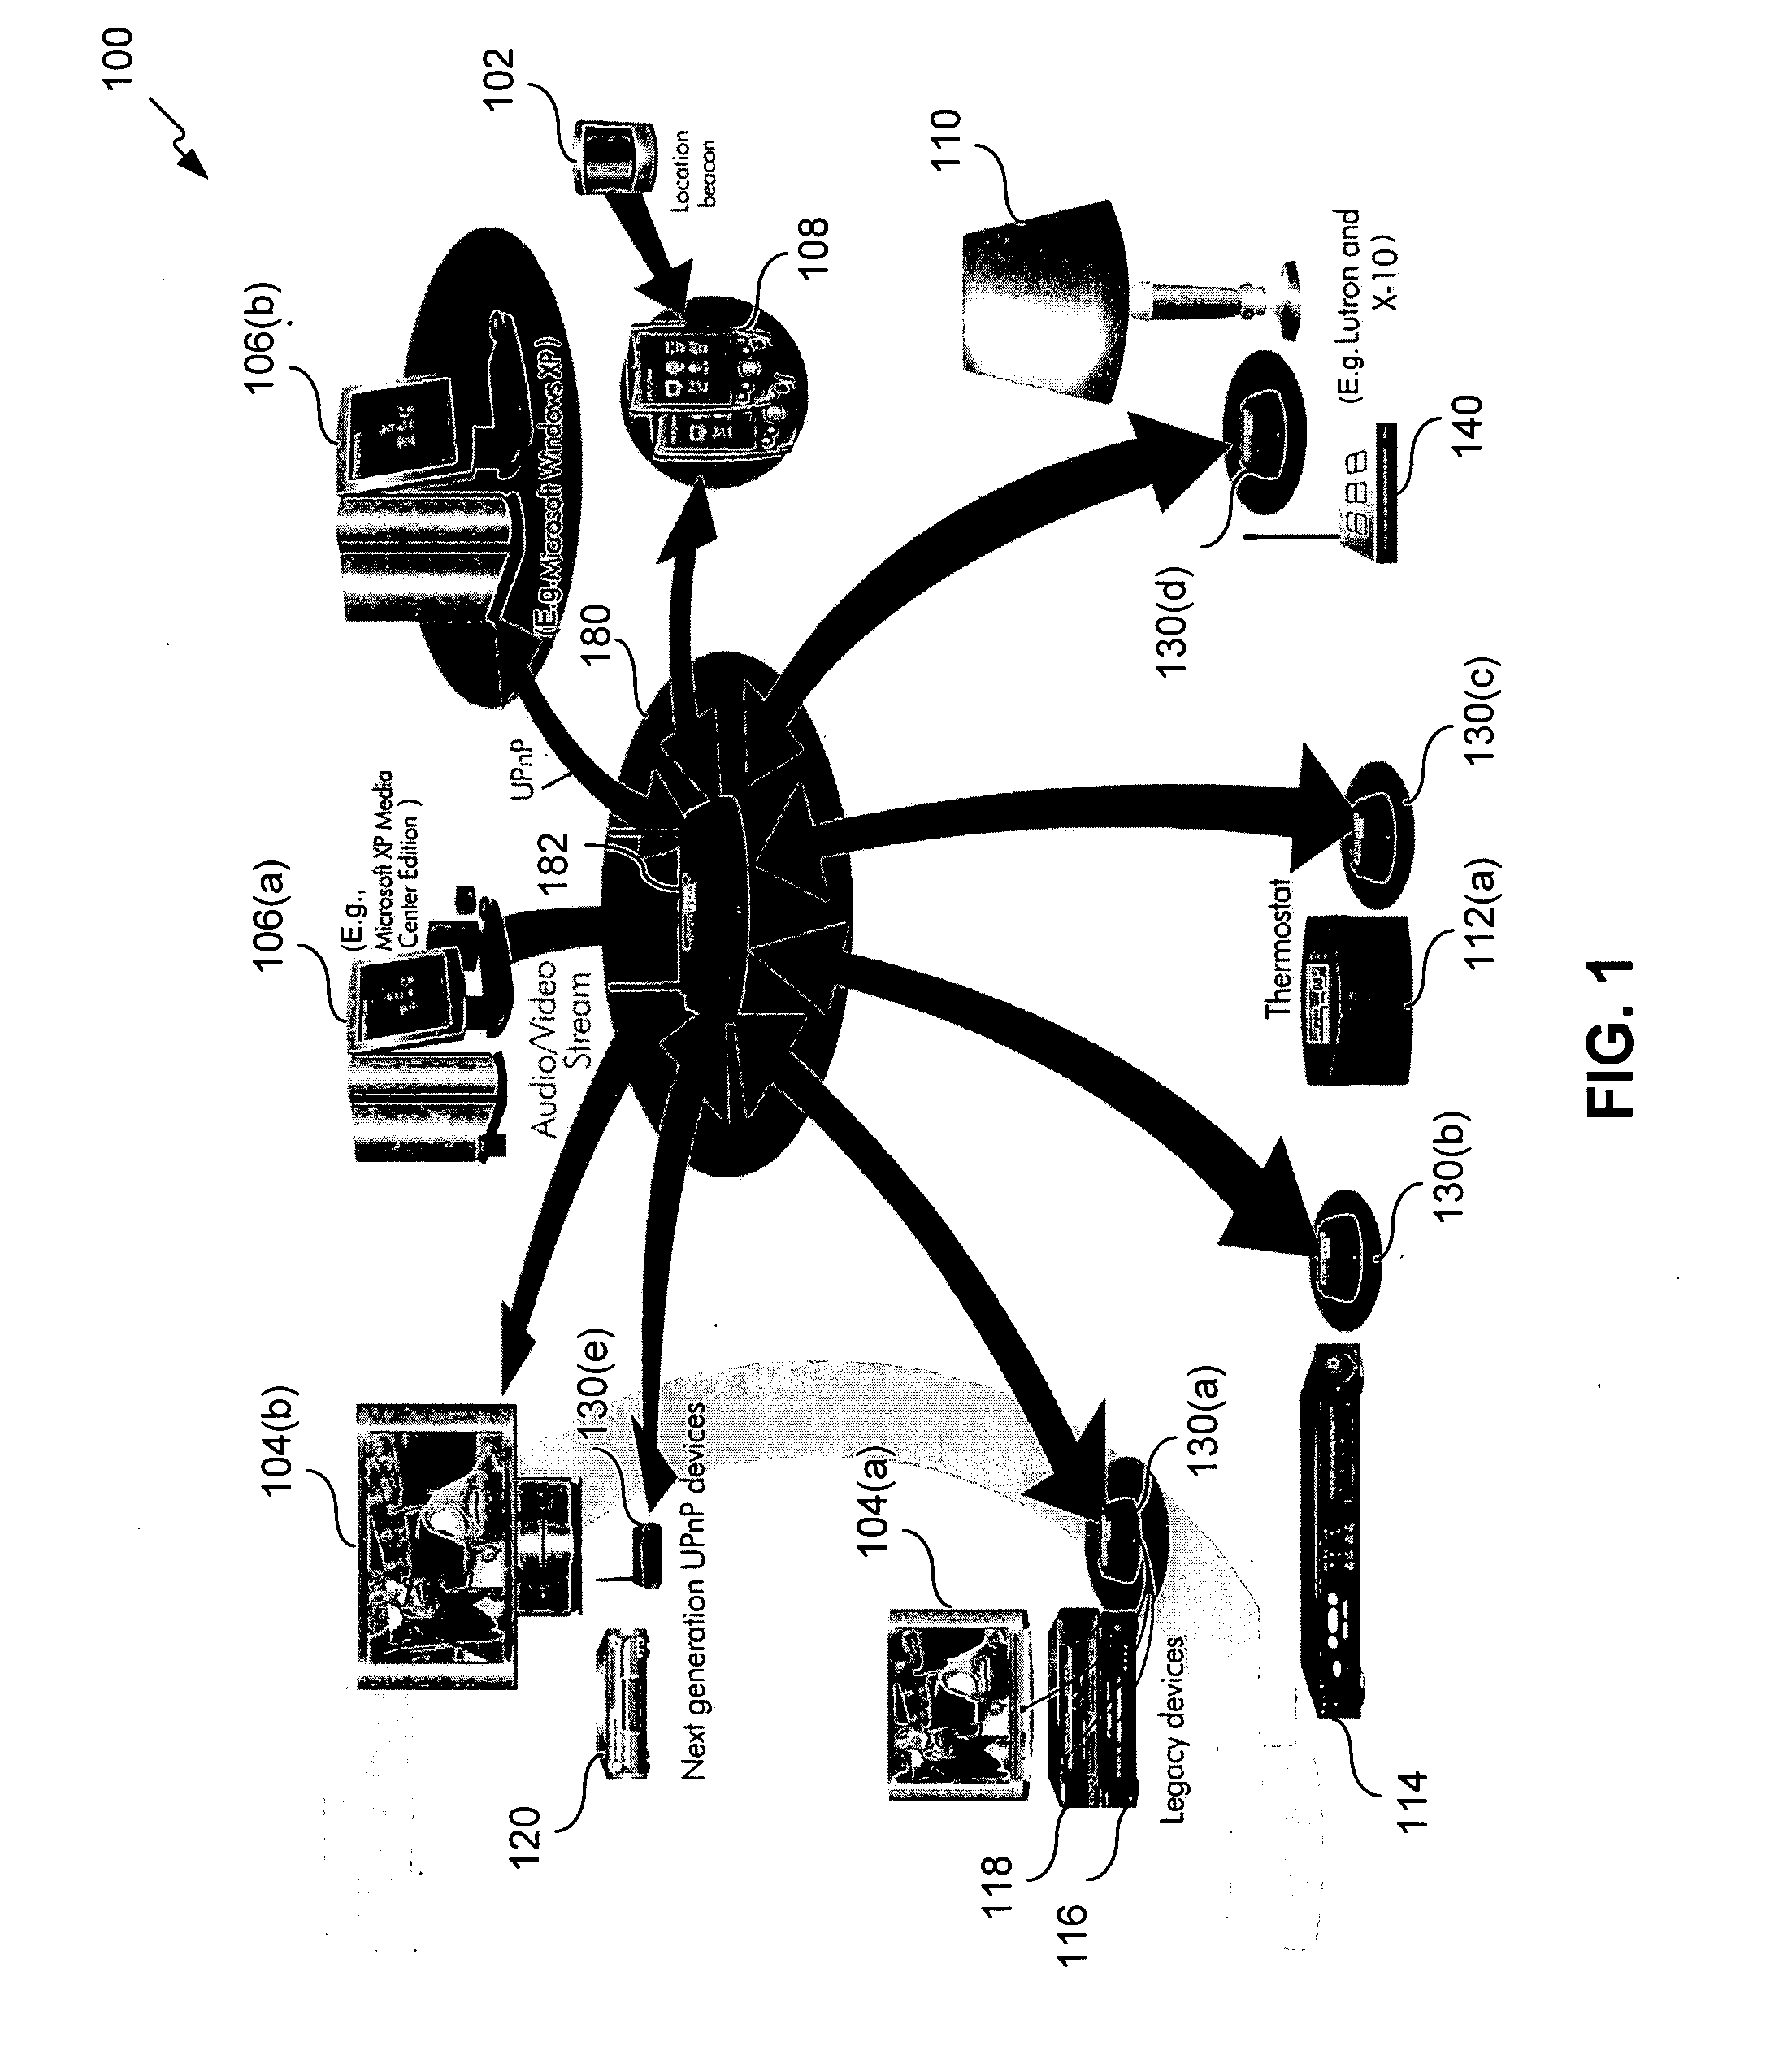 User interface for multi-device control